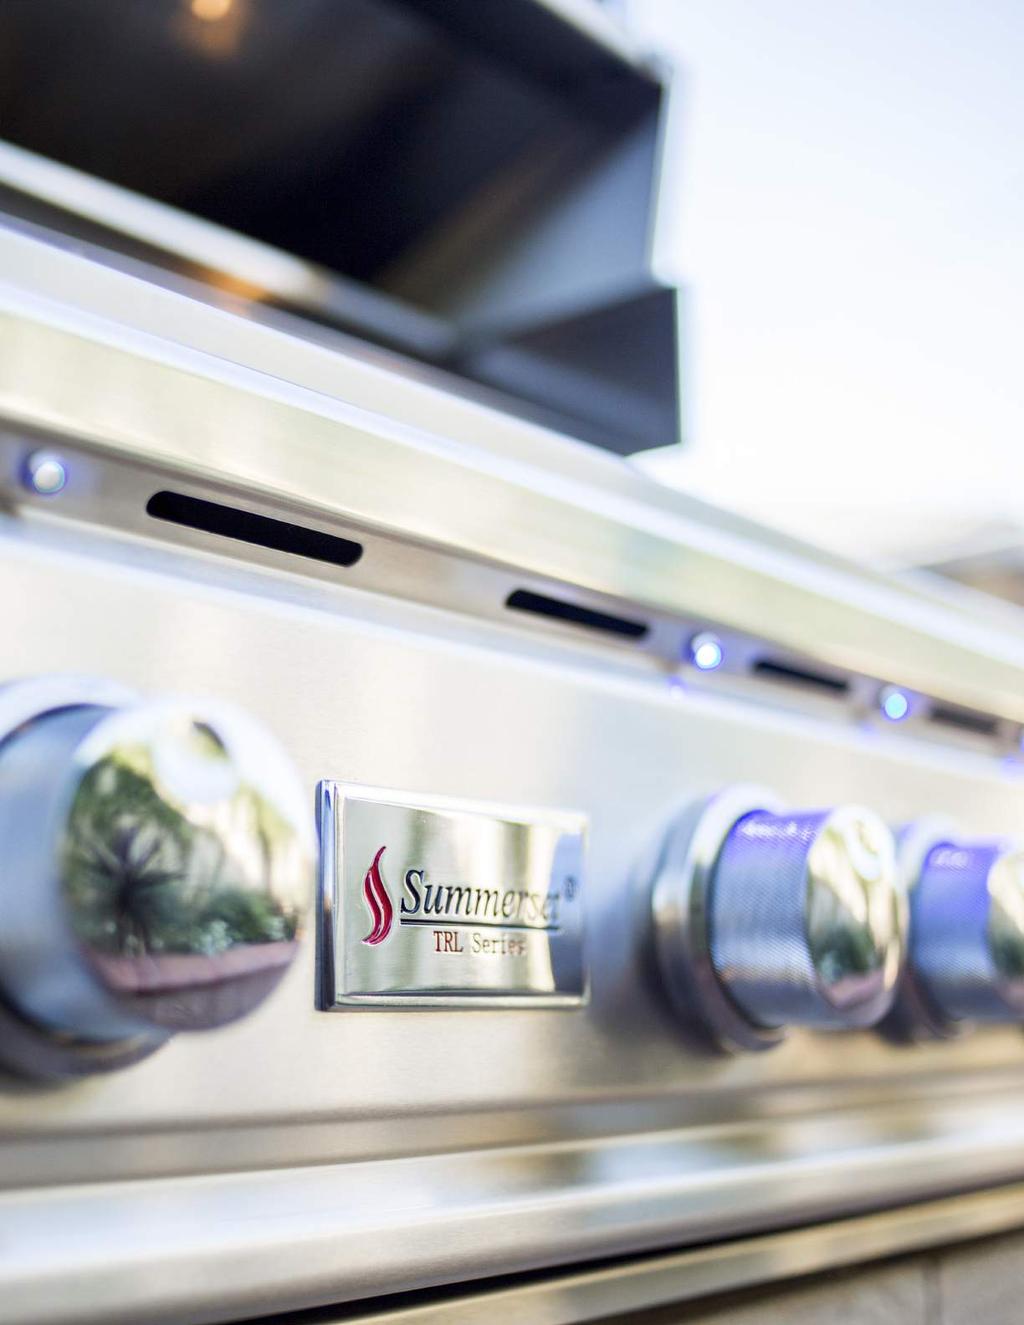 OUT SUMMERSET Summerset Professional Grills offers a complete line of stainless steel grills, grill carts, Q islands, fire pits, doors, drawers, components and more.